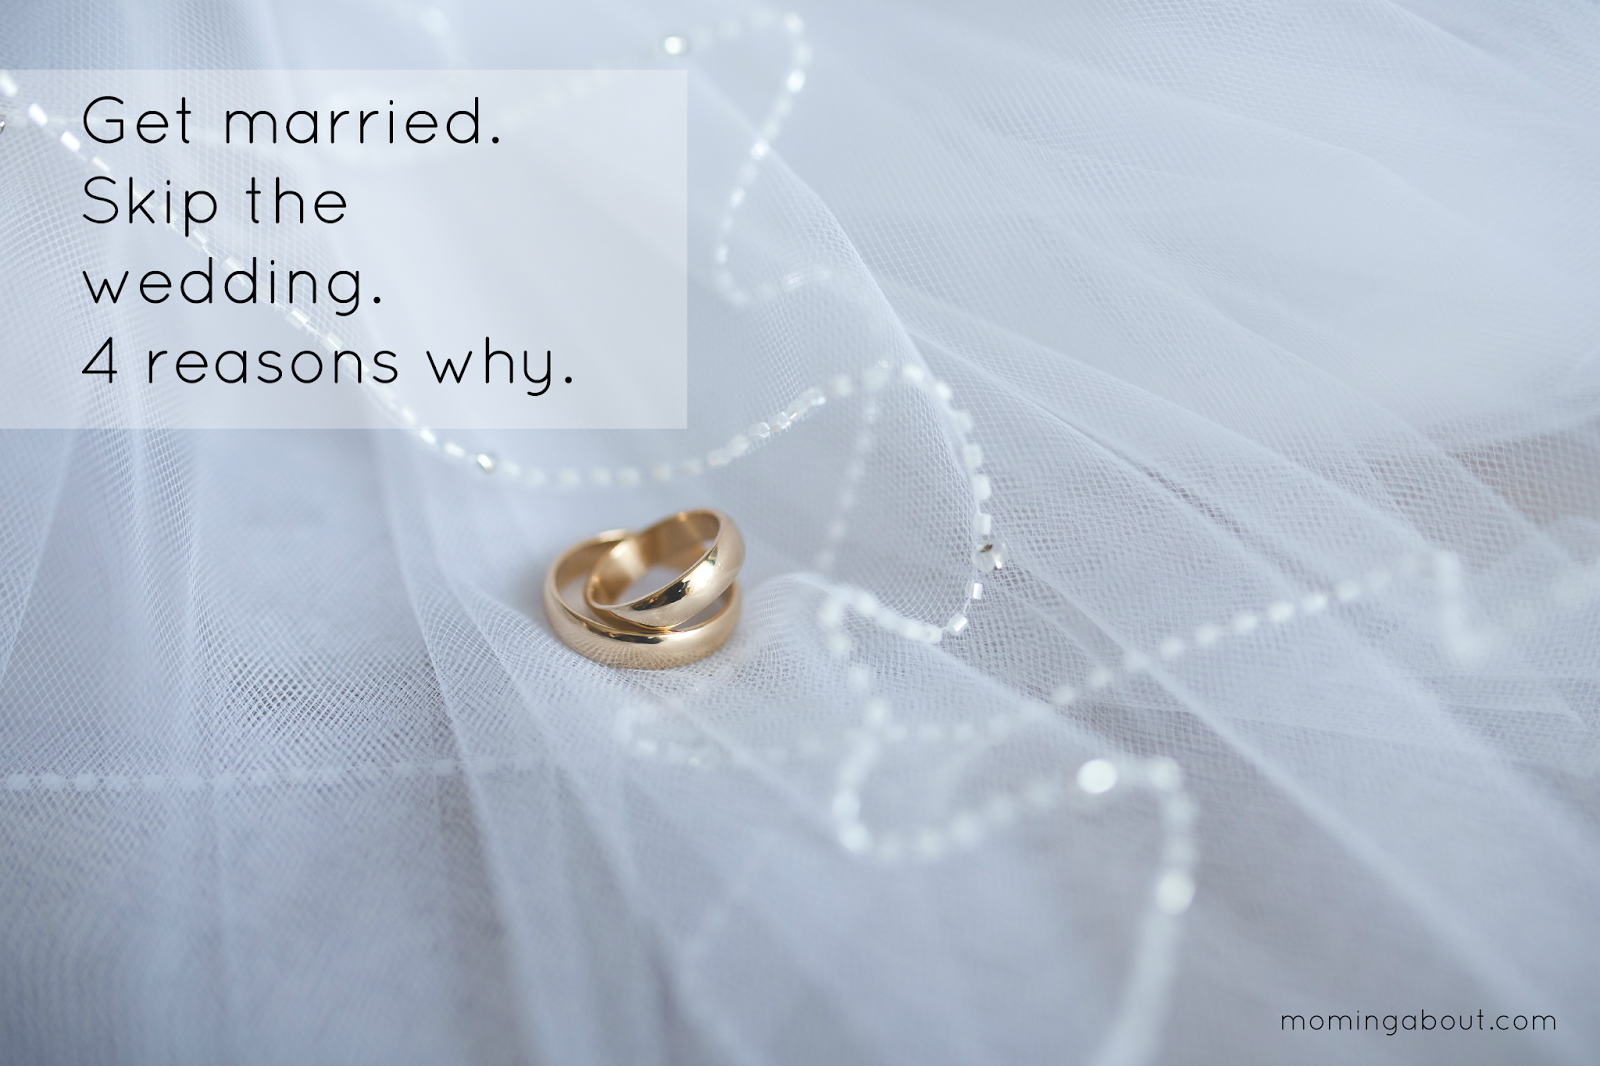 4 reasons to get married but skip the wedding